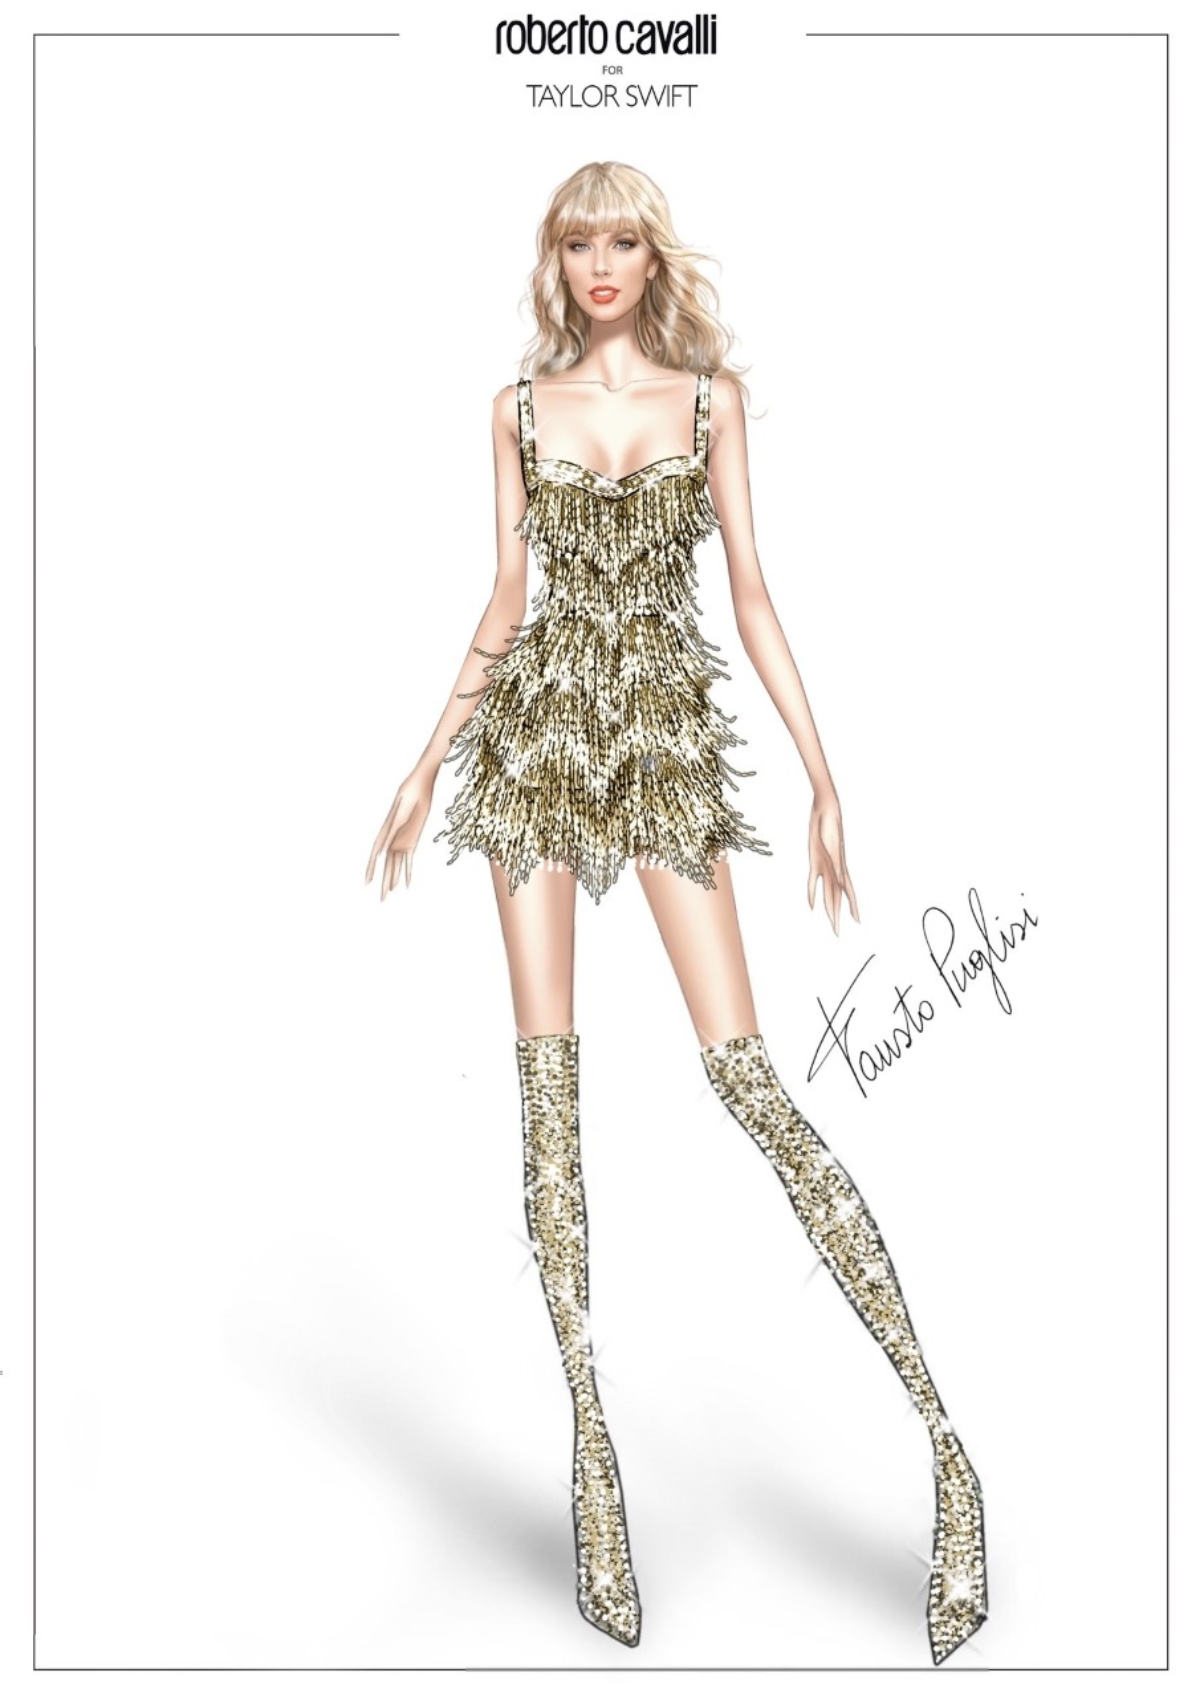 Roberto Cavalli Created A Couture Capsule For Taylor Swift - The Eras Tour